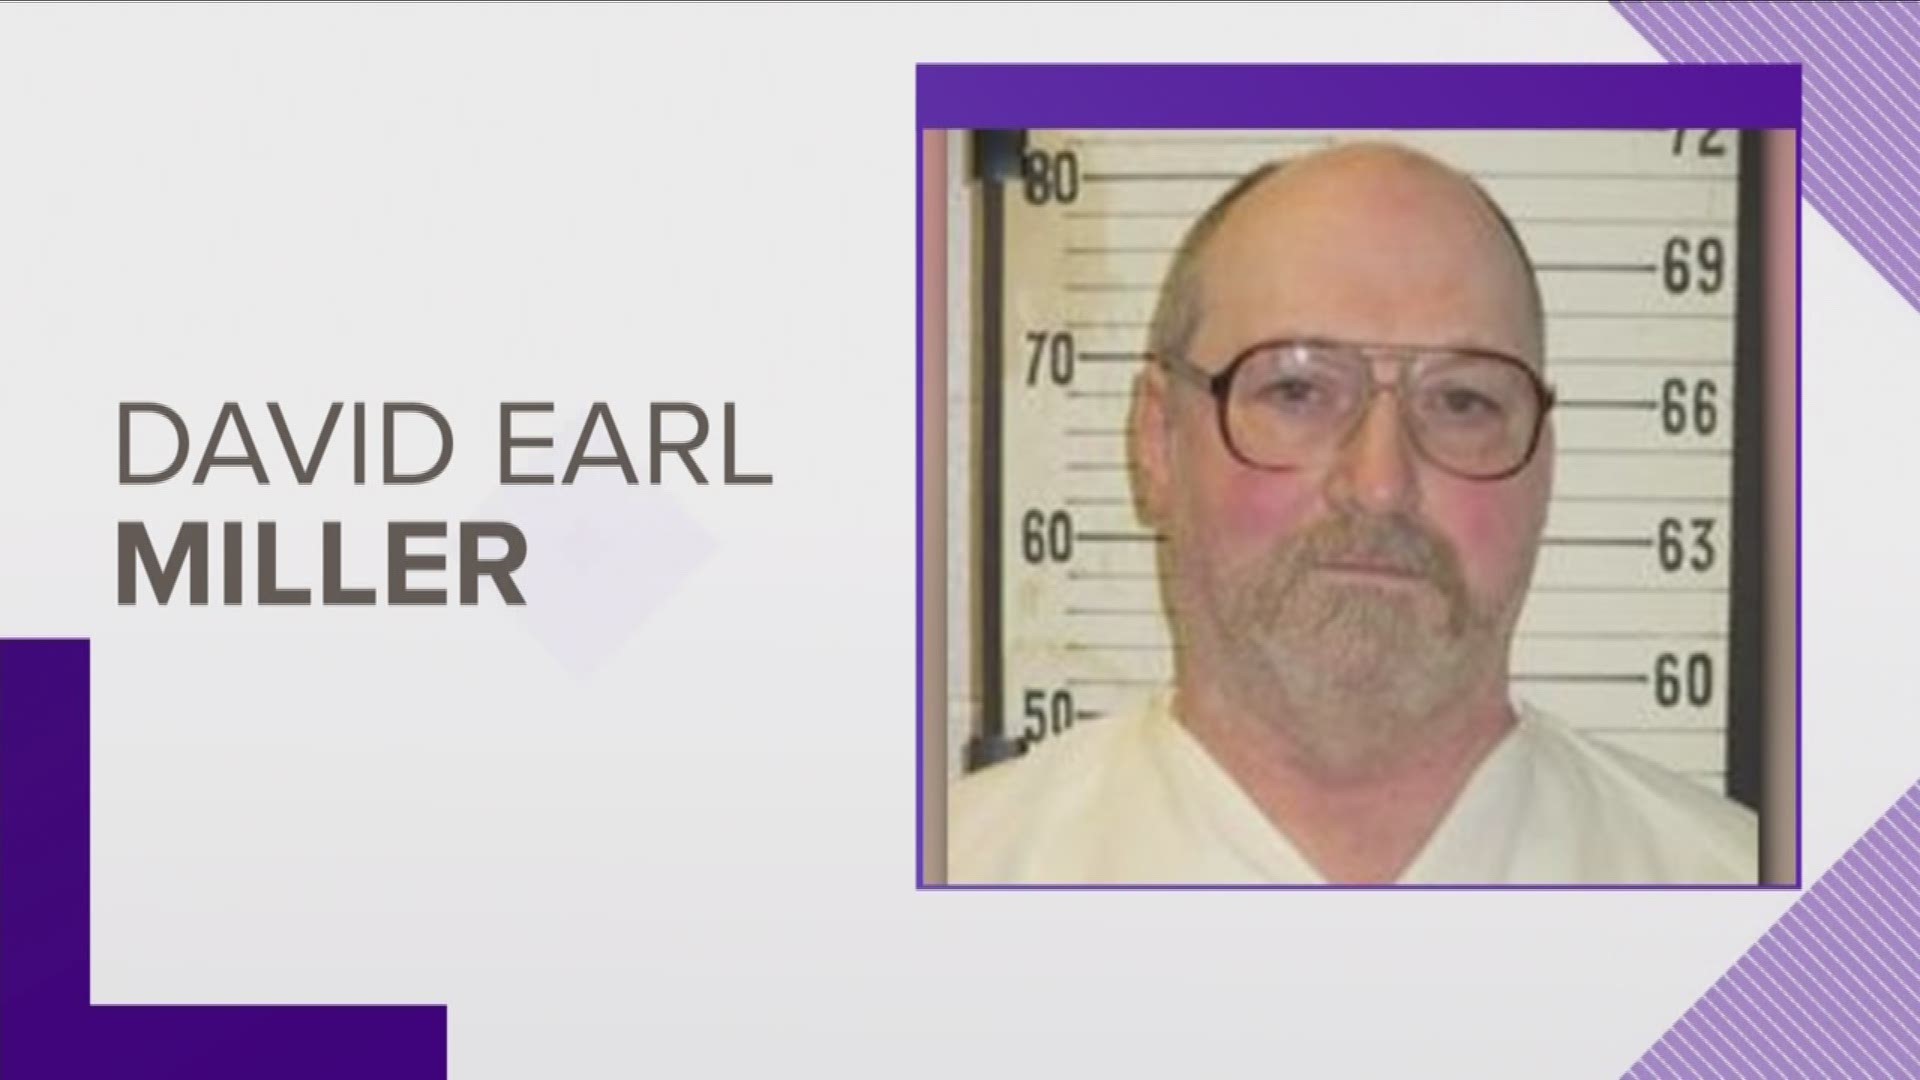 David Earl Miller has been on Tennessee's death row for almost four decades for the brutal rape and murder of Lee Standifer.